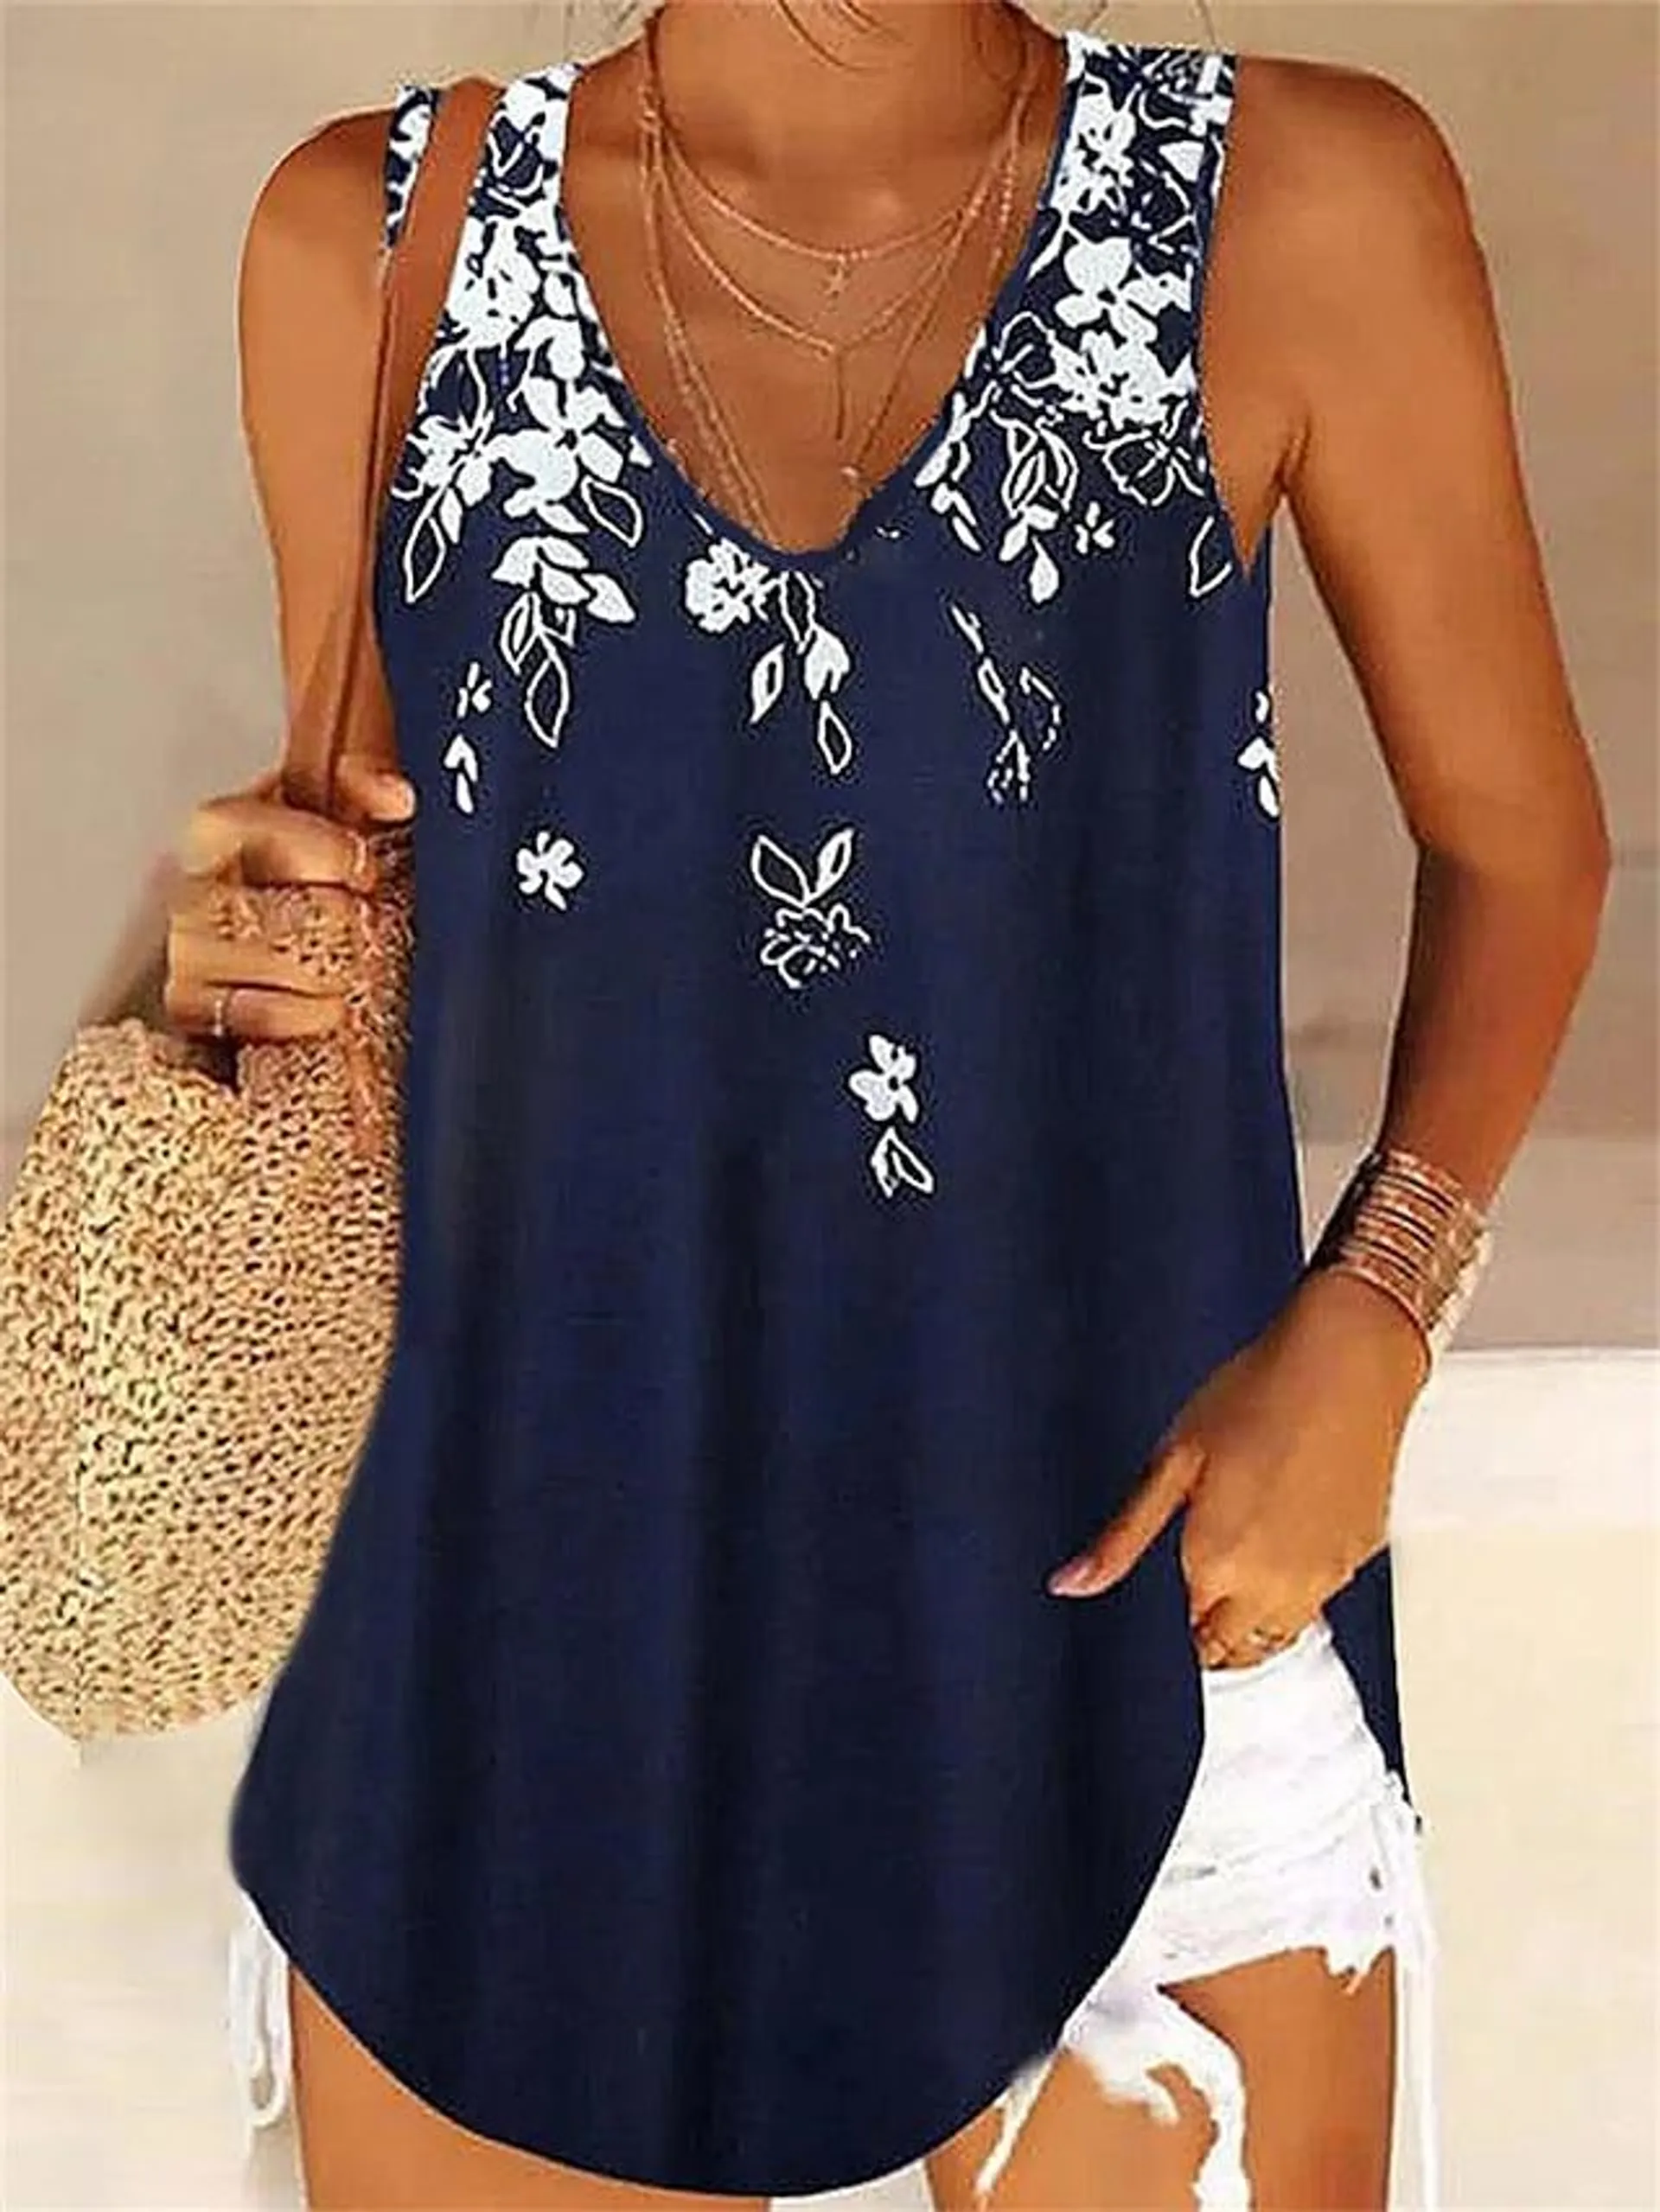 Women's Tank Top Camis Pink Blue Sky Blue Floral Print Sleeveless Casual V Neck Regular Floral S